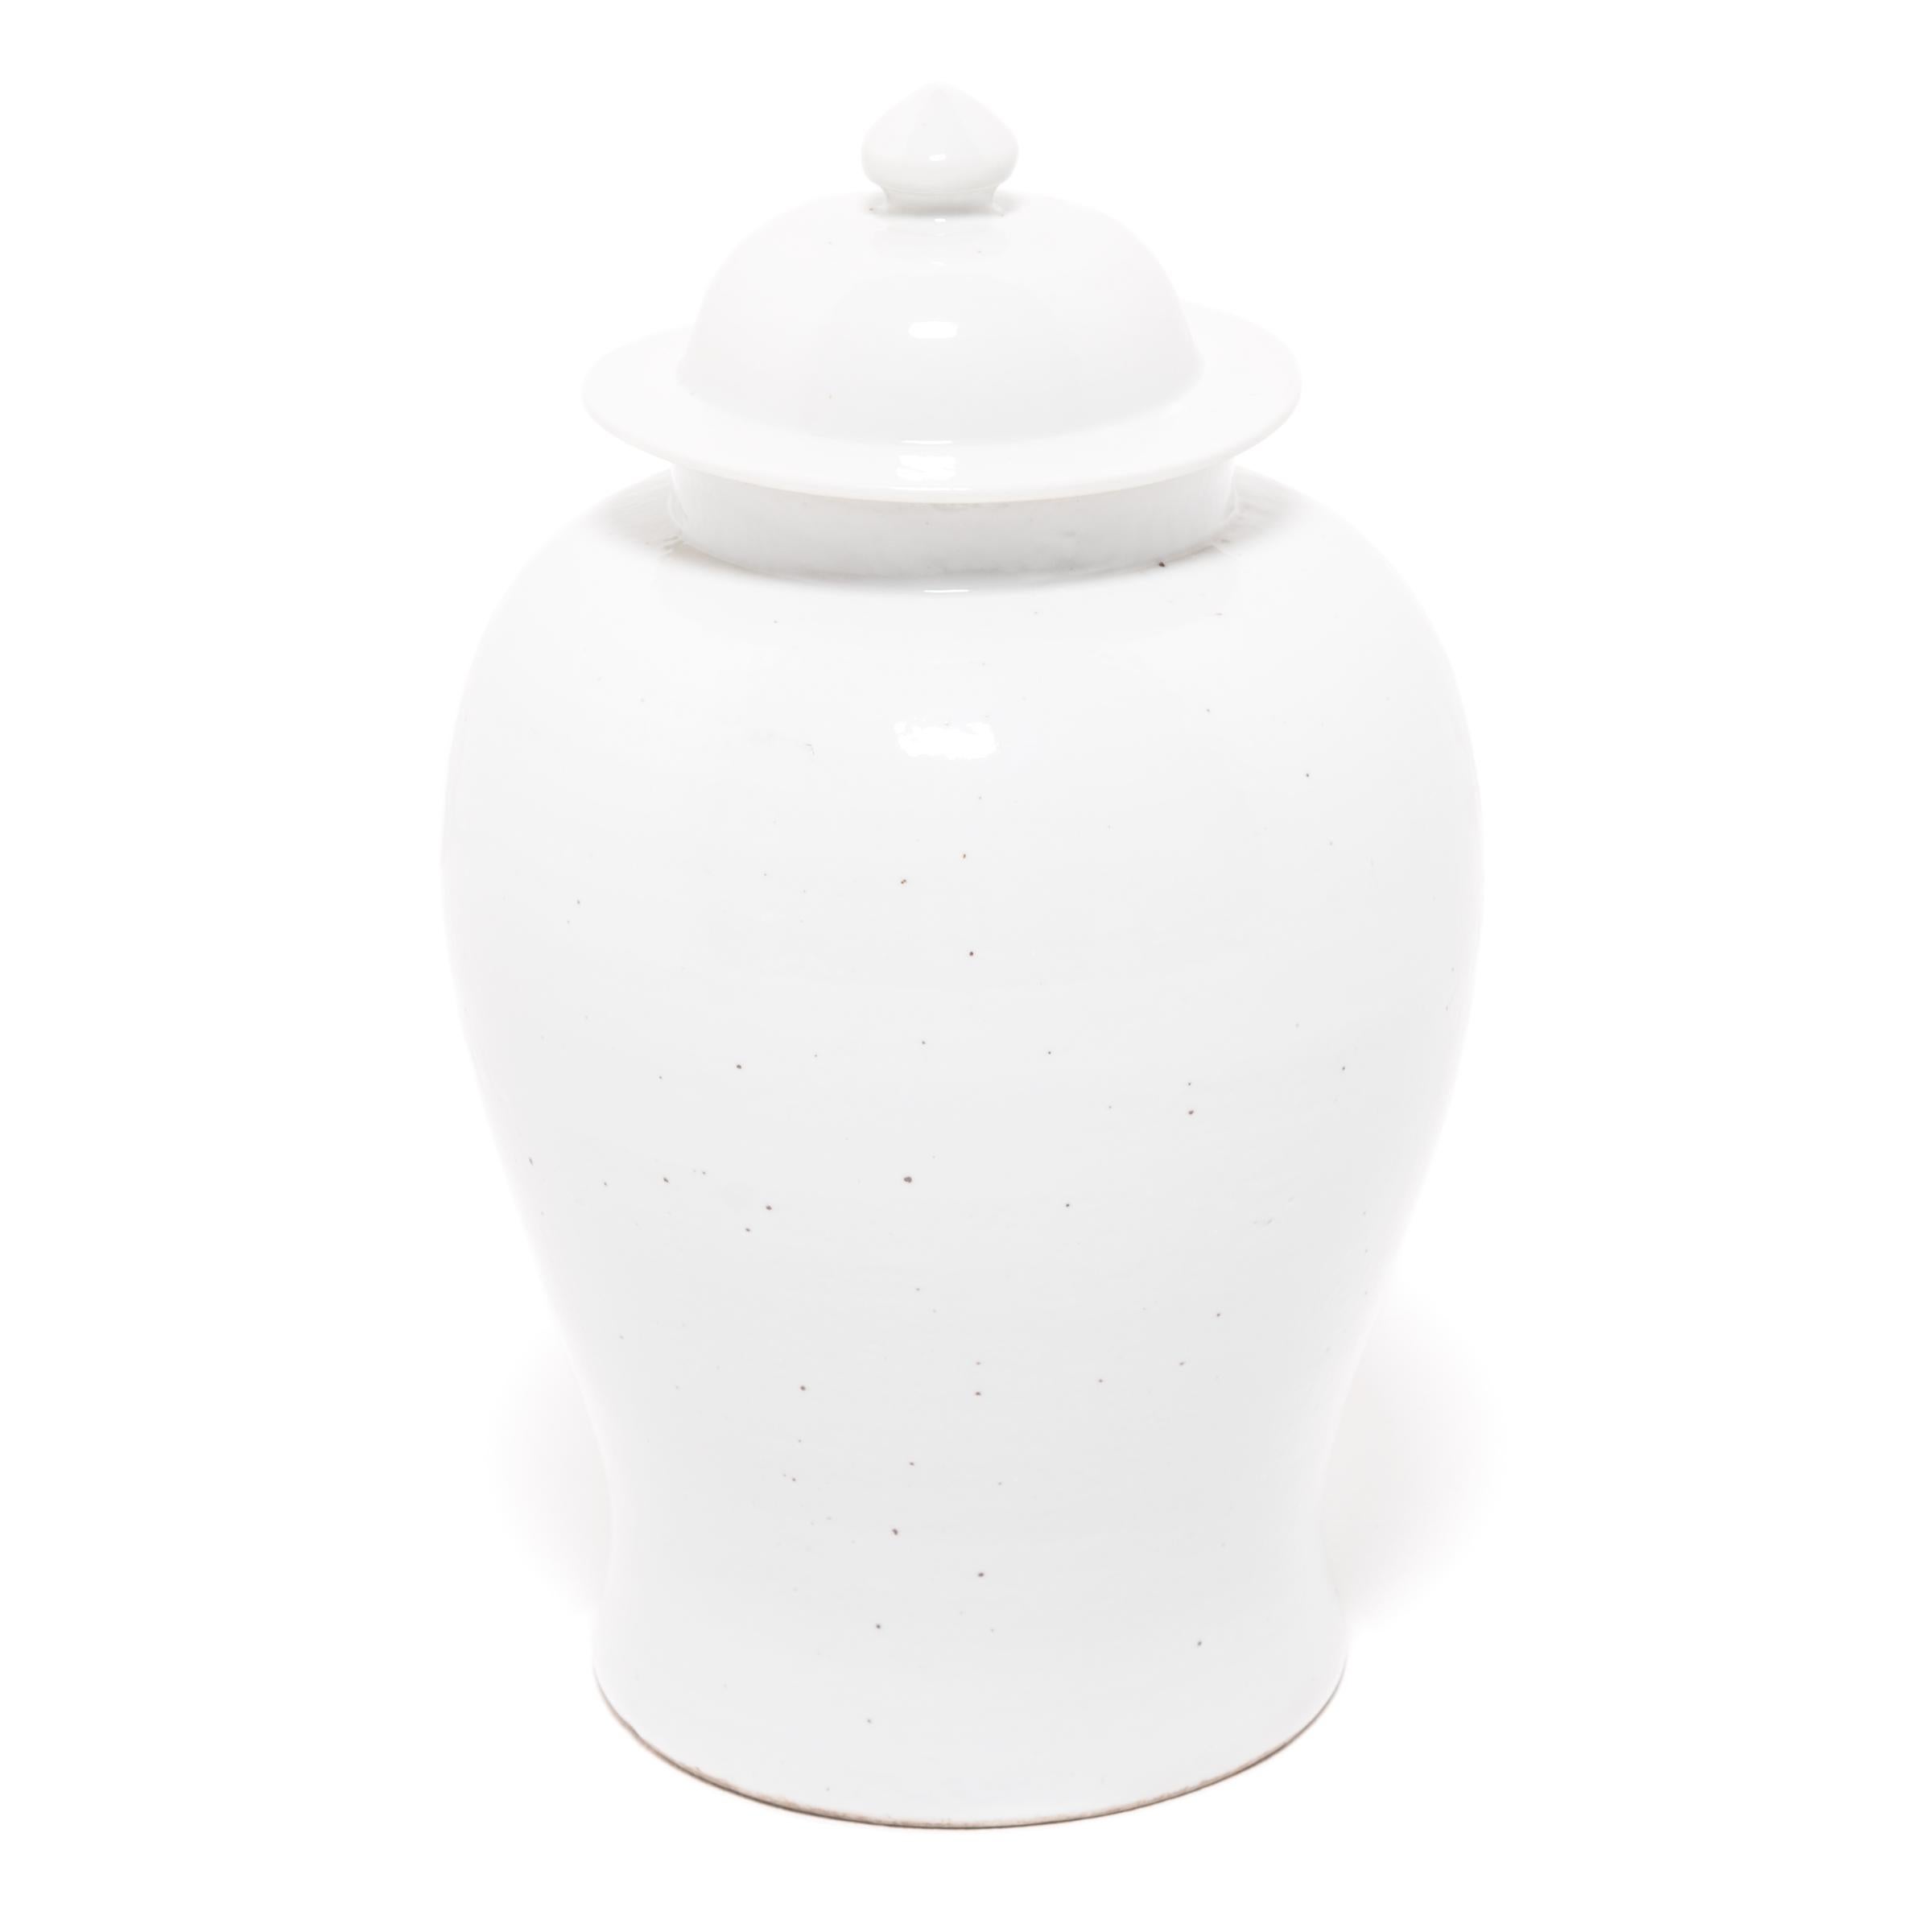 Defined by its rounded body, high shoulders and domed lid, the time-honored look of the Chinese baluster jar takes on a streamlined look in this contemporary interpretation created in Jiangxi province. Once elaborately decorated, this modern take is